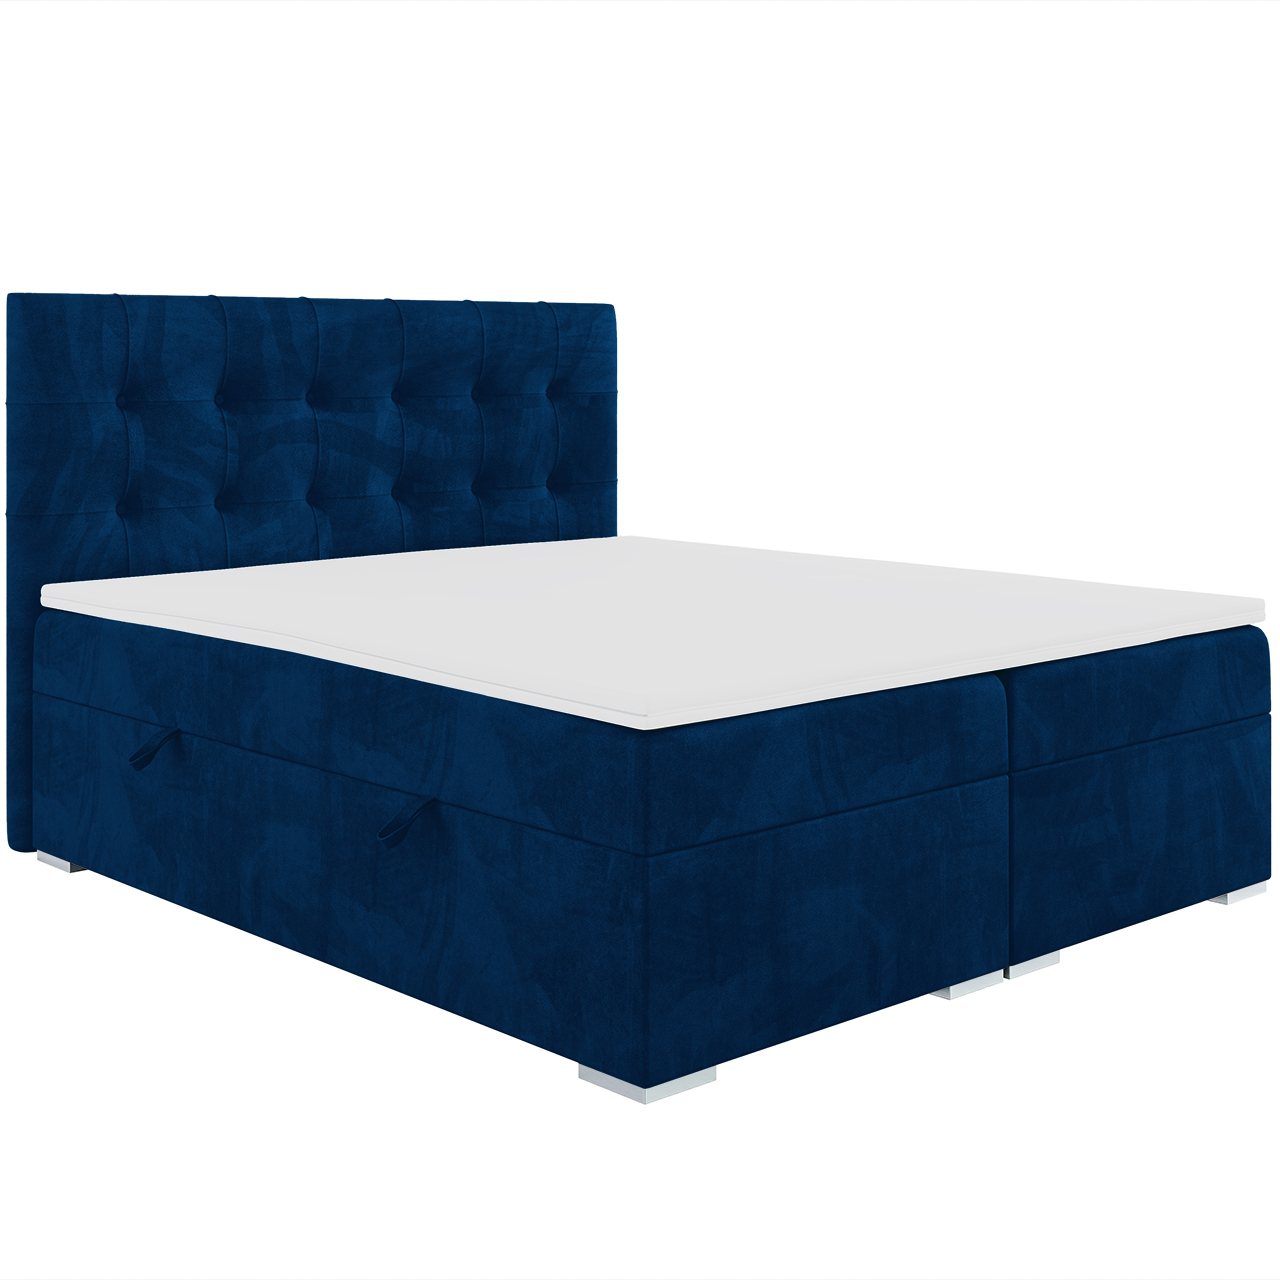 Upholstered bed CARLO 140x200 riviera 81